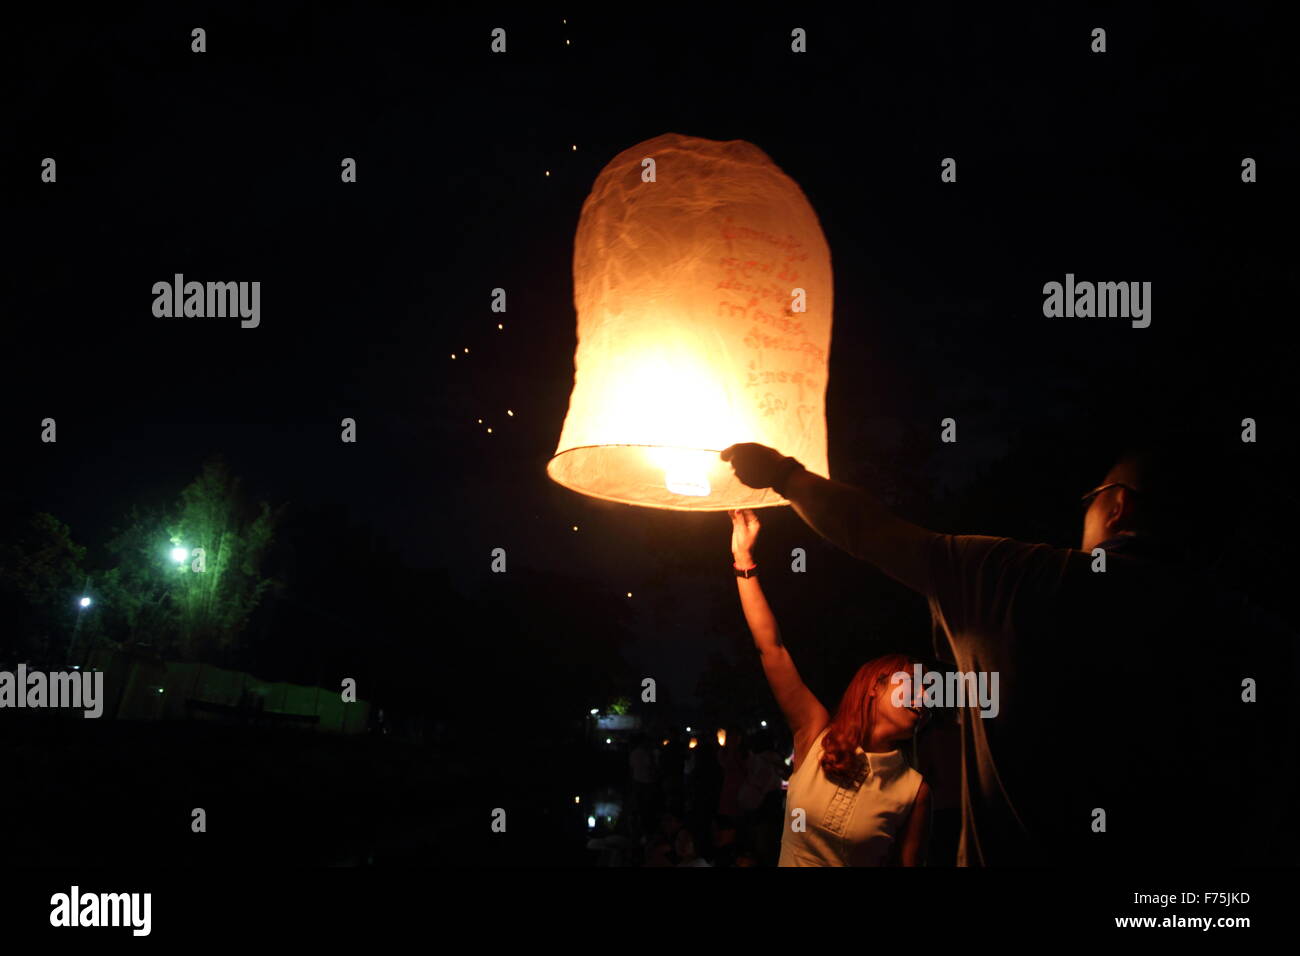 Chiang Mai, Thailand. 25th November 2015. Tourists gather to release Khom Loi (sky lantern) during the Yi Peng Festival outside the Lanna Dhutanka Temple in Chiang Mai. The Lanna Kathina Ceremony takes place around the Loy Krathong festival each year. Stock Photo